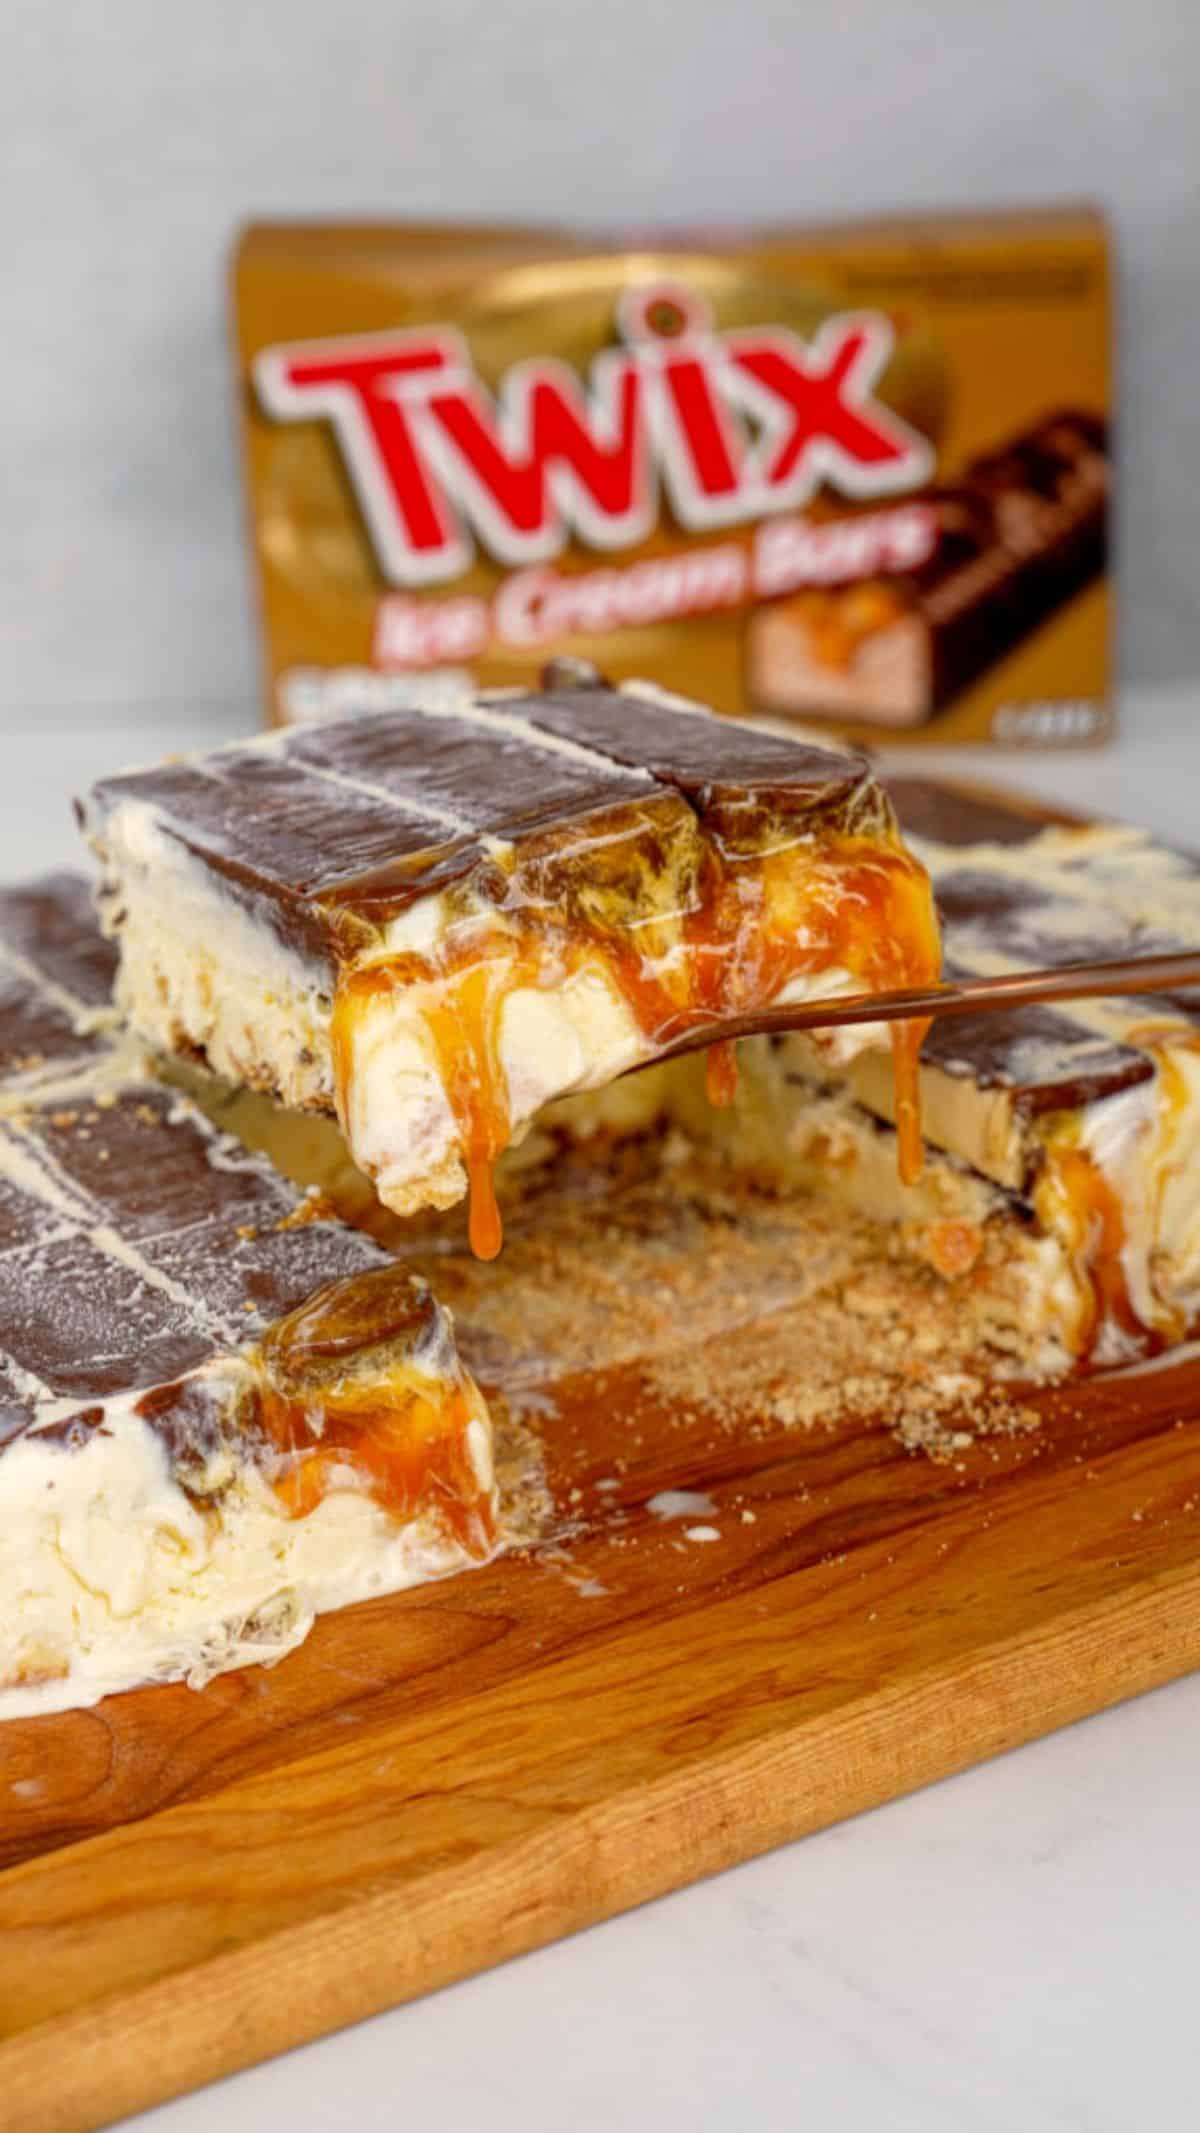 Twix Ice Cream Bar Cake on a wooden tray picked by a spatula.